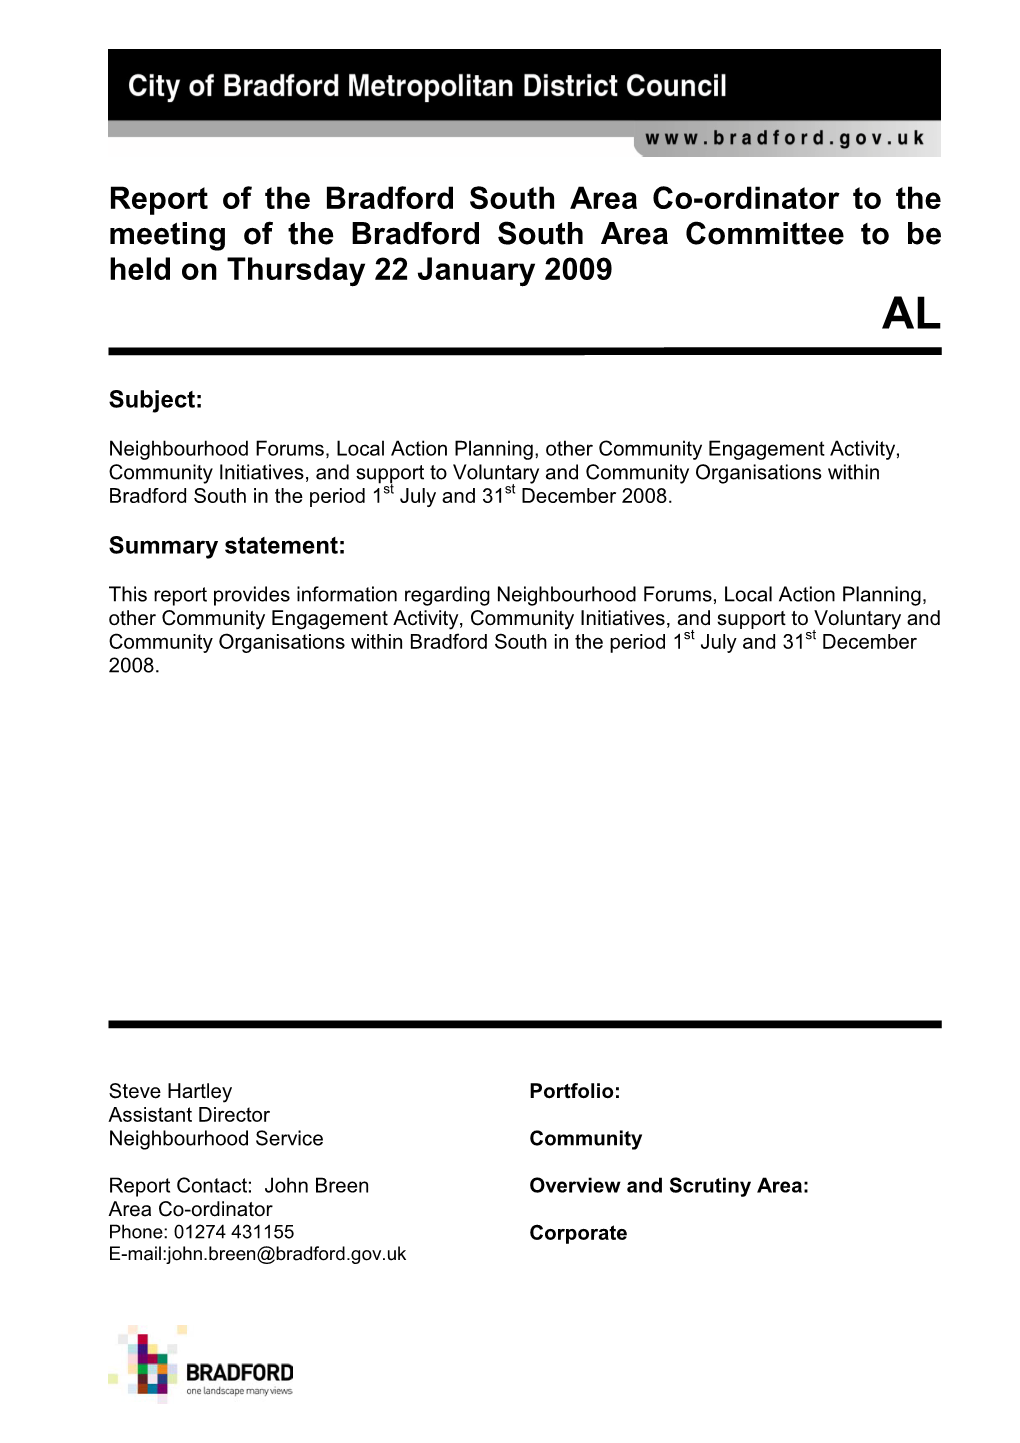 Report of the Bradford South Area Co-Ordinator to the Meeting of the Bradford South Area Committee to Be Held on Thursday 22 January 2009 AL